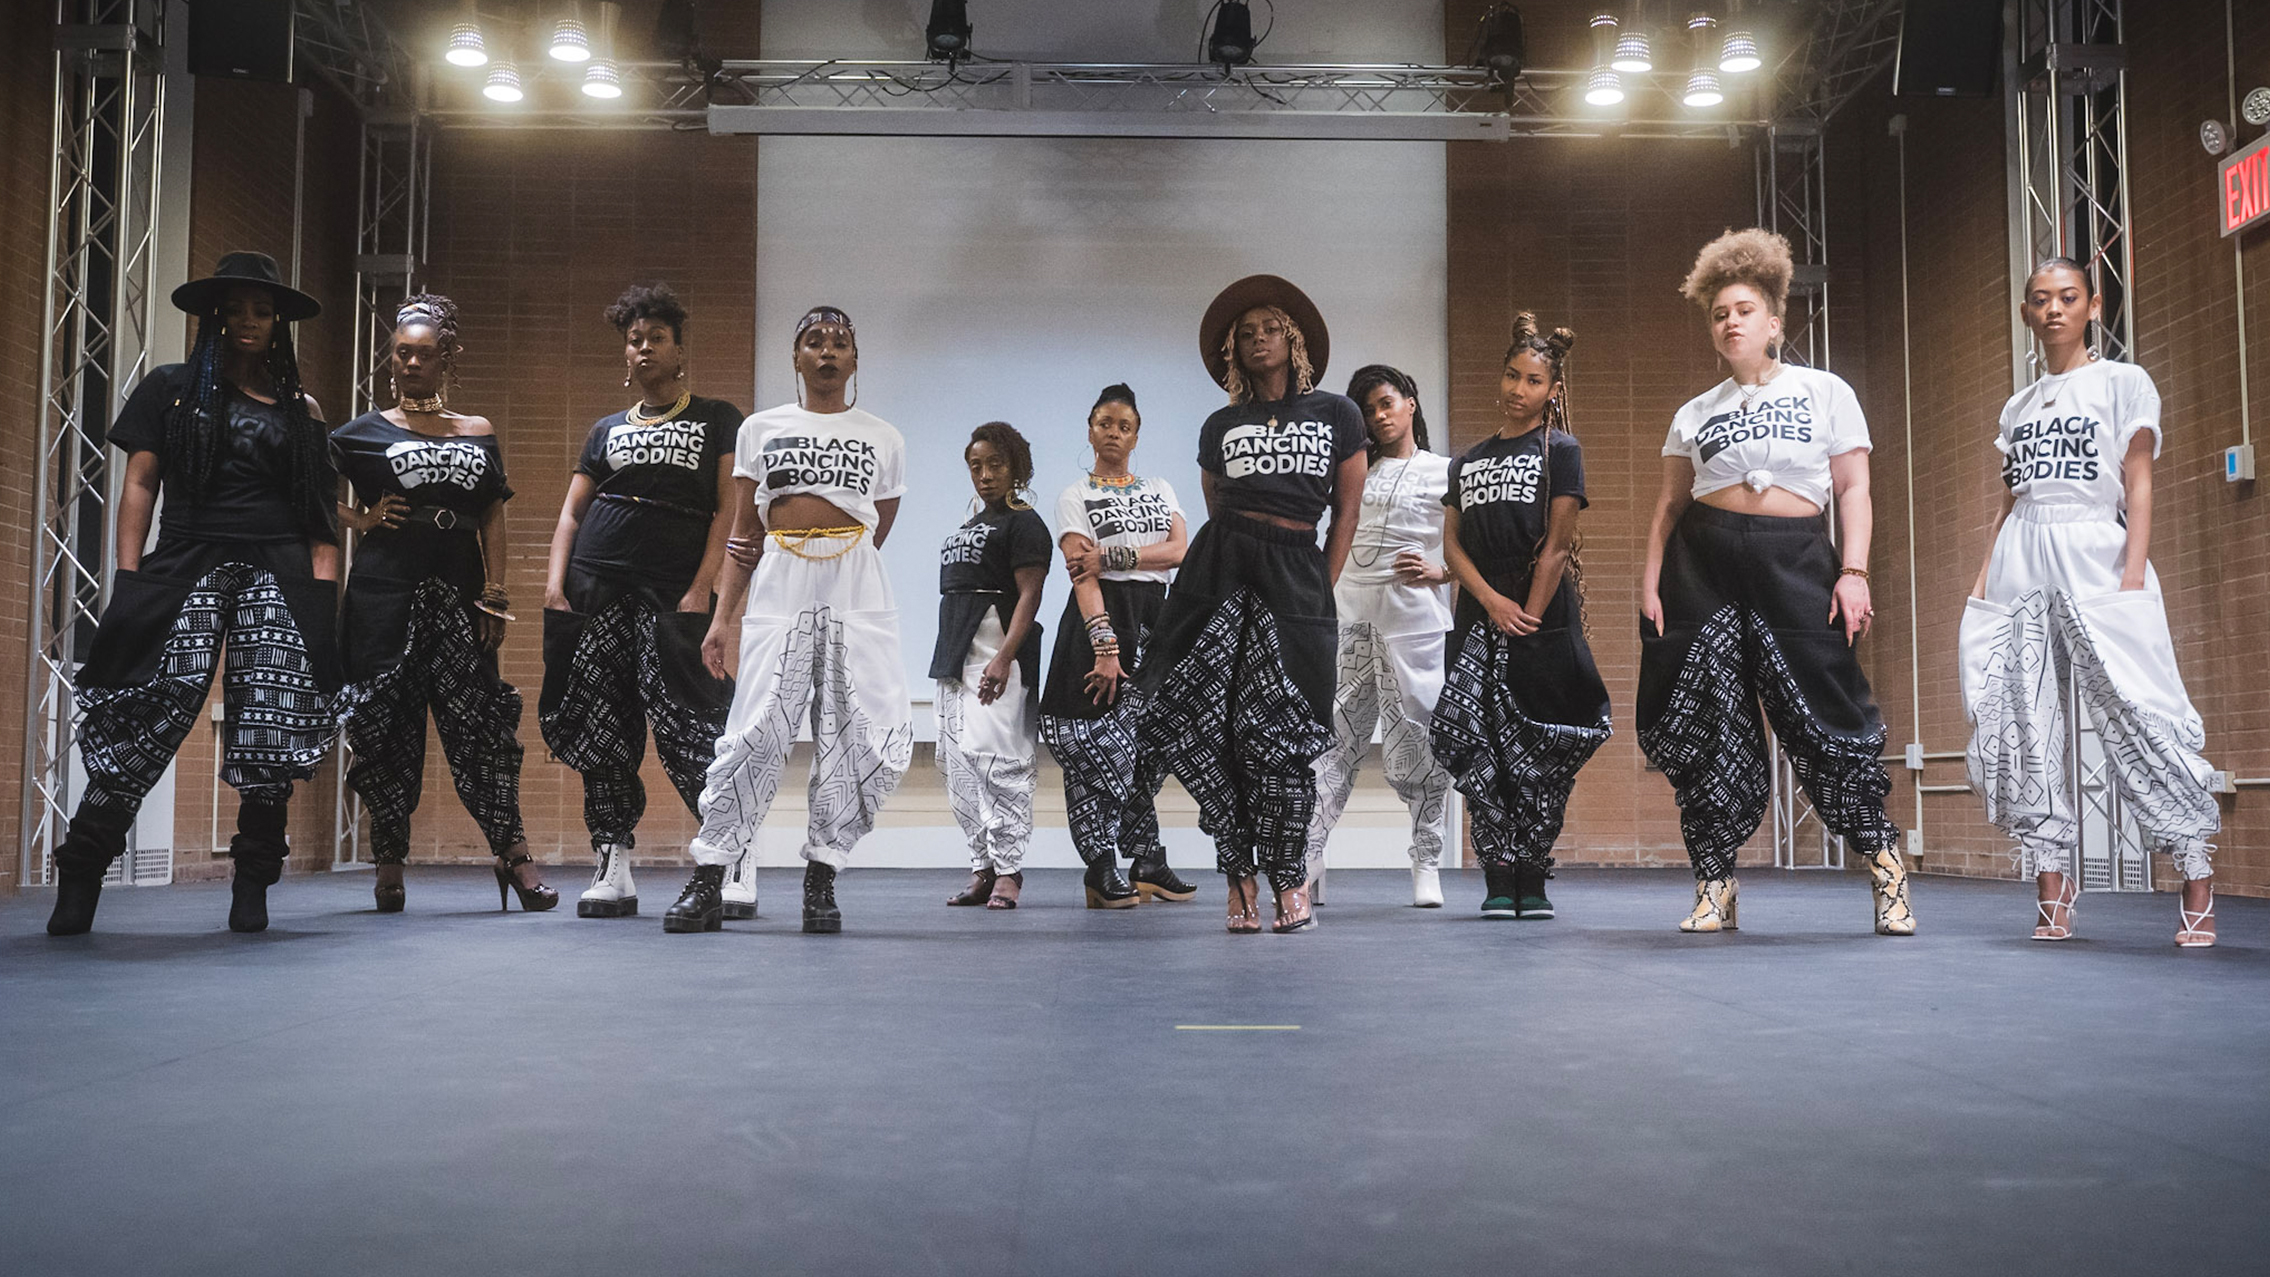 Ladies of Hip-Hop Dance Collective stand on an indoor stage facing the camera.